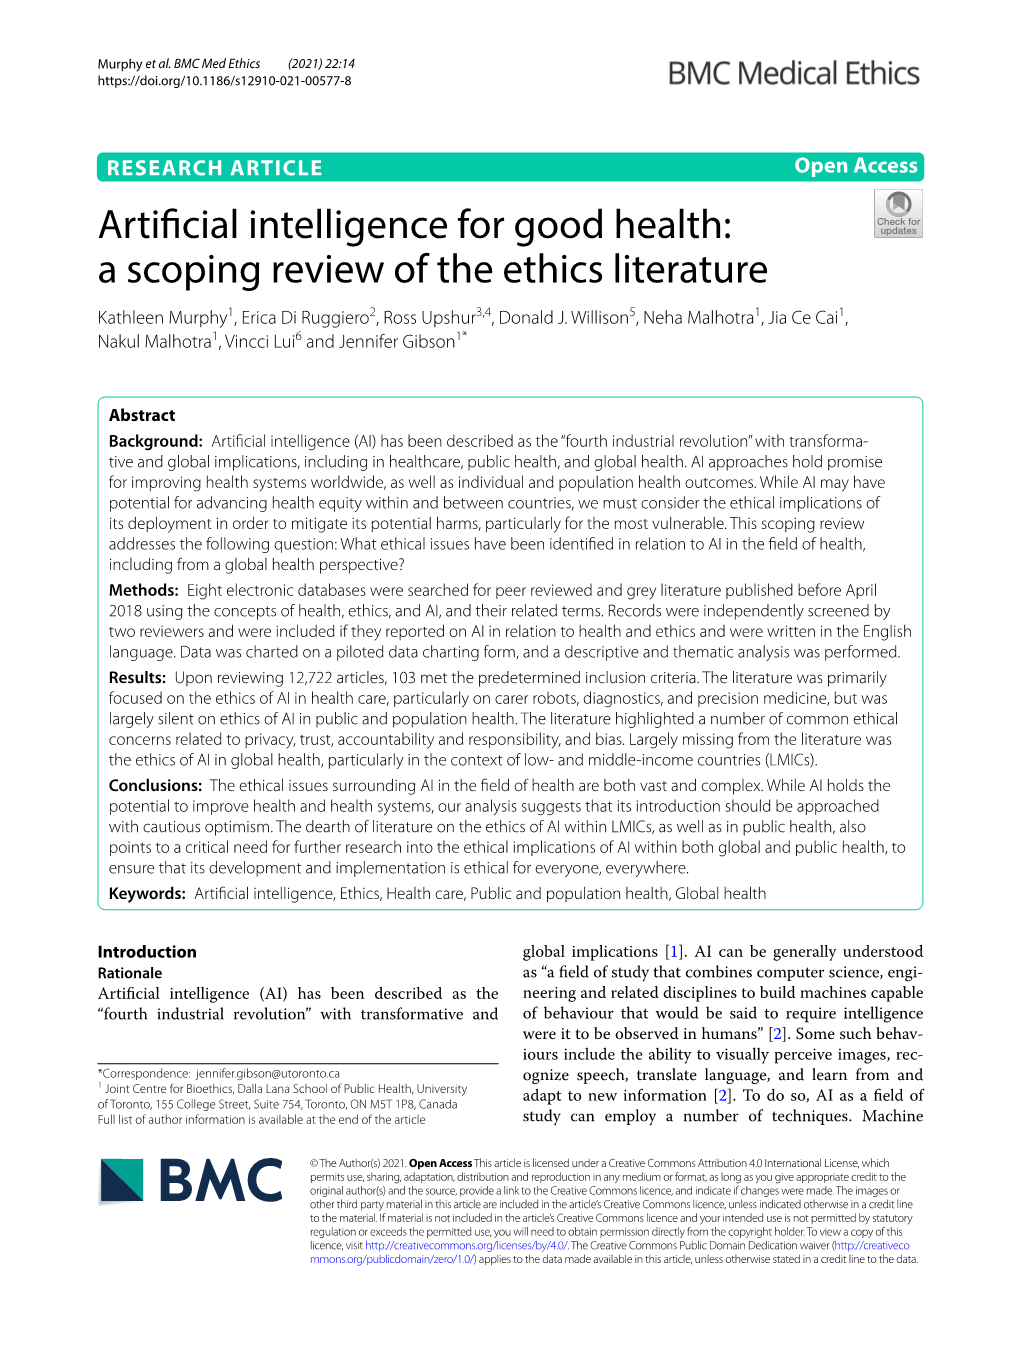 Artificial Intelligence for Good Health: a Scoping Review of the Ethics Literature